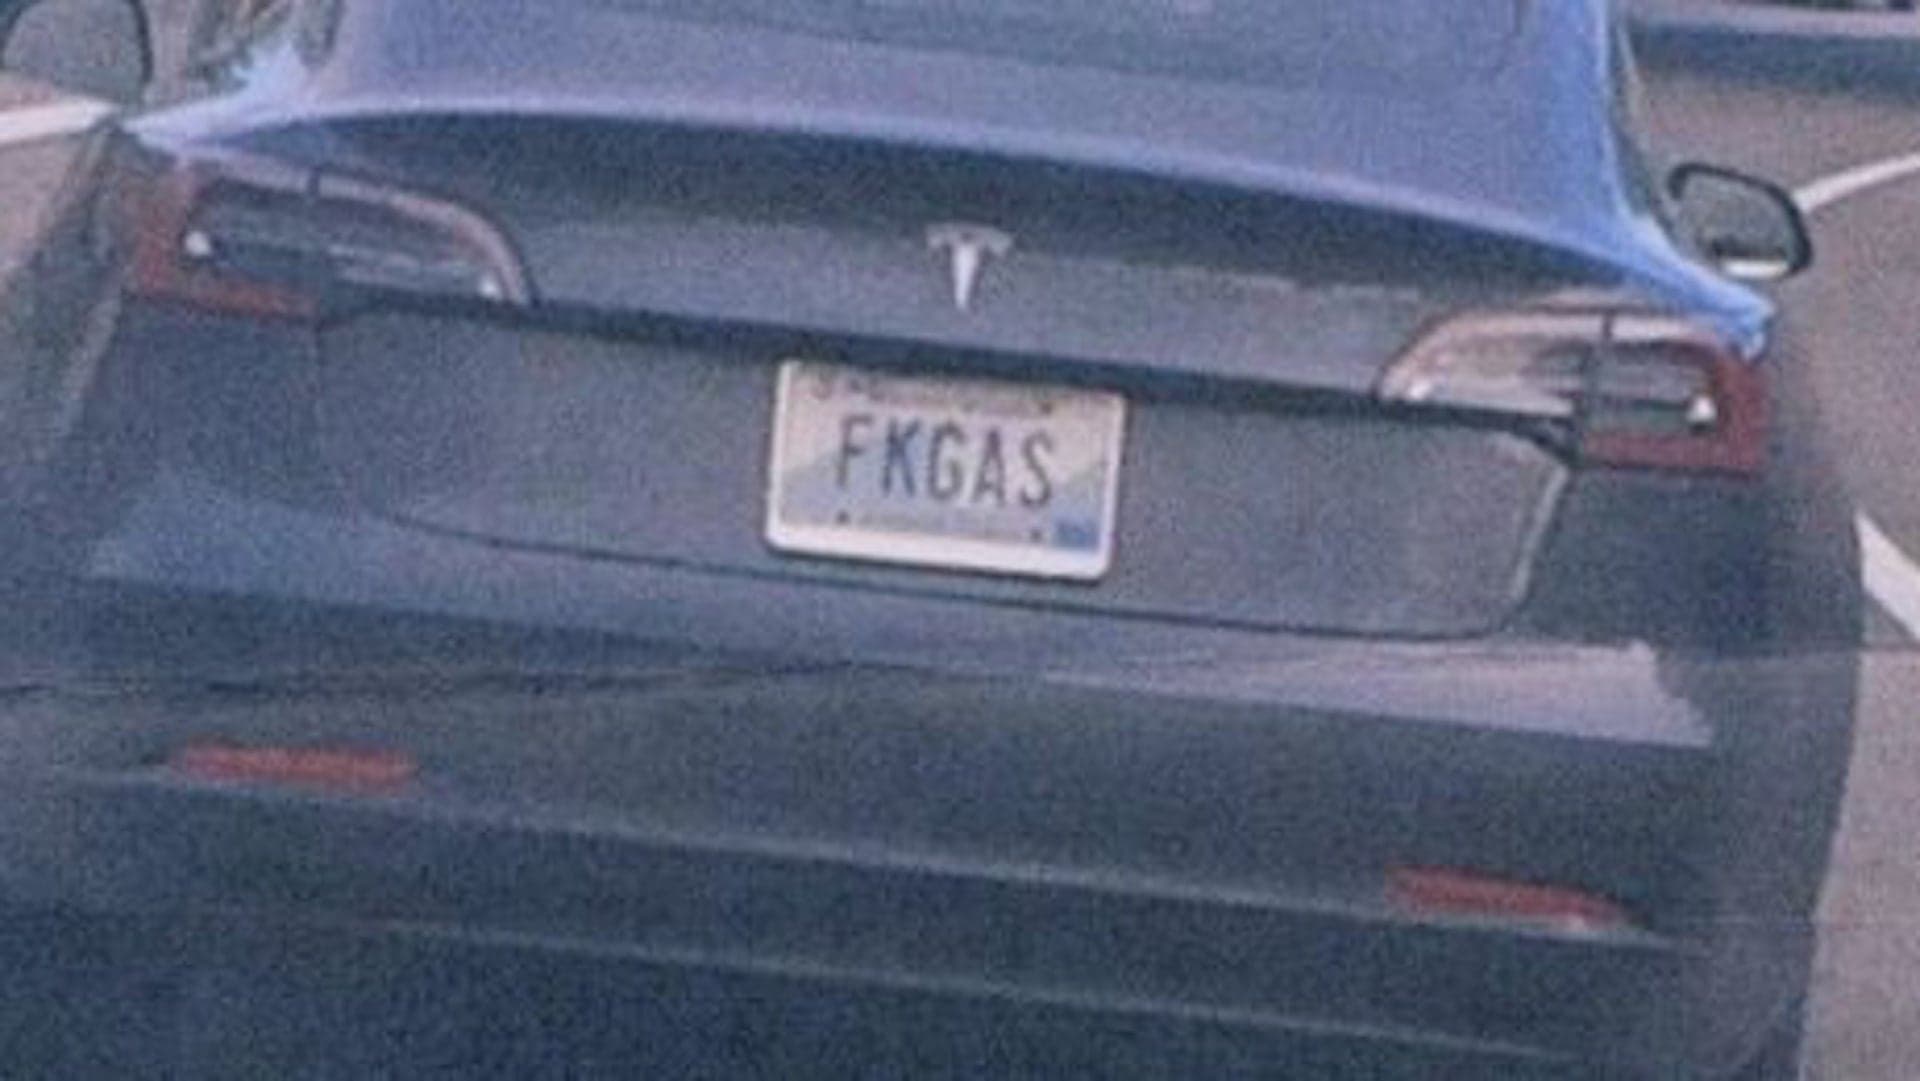 ACLU Fighting for Tesla Driver’s Right to Keep ‘FKGAS’ Vanity Plate